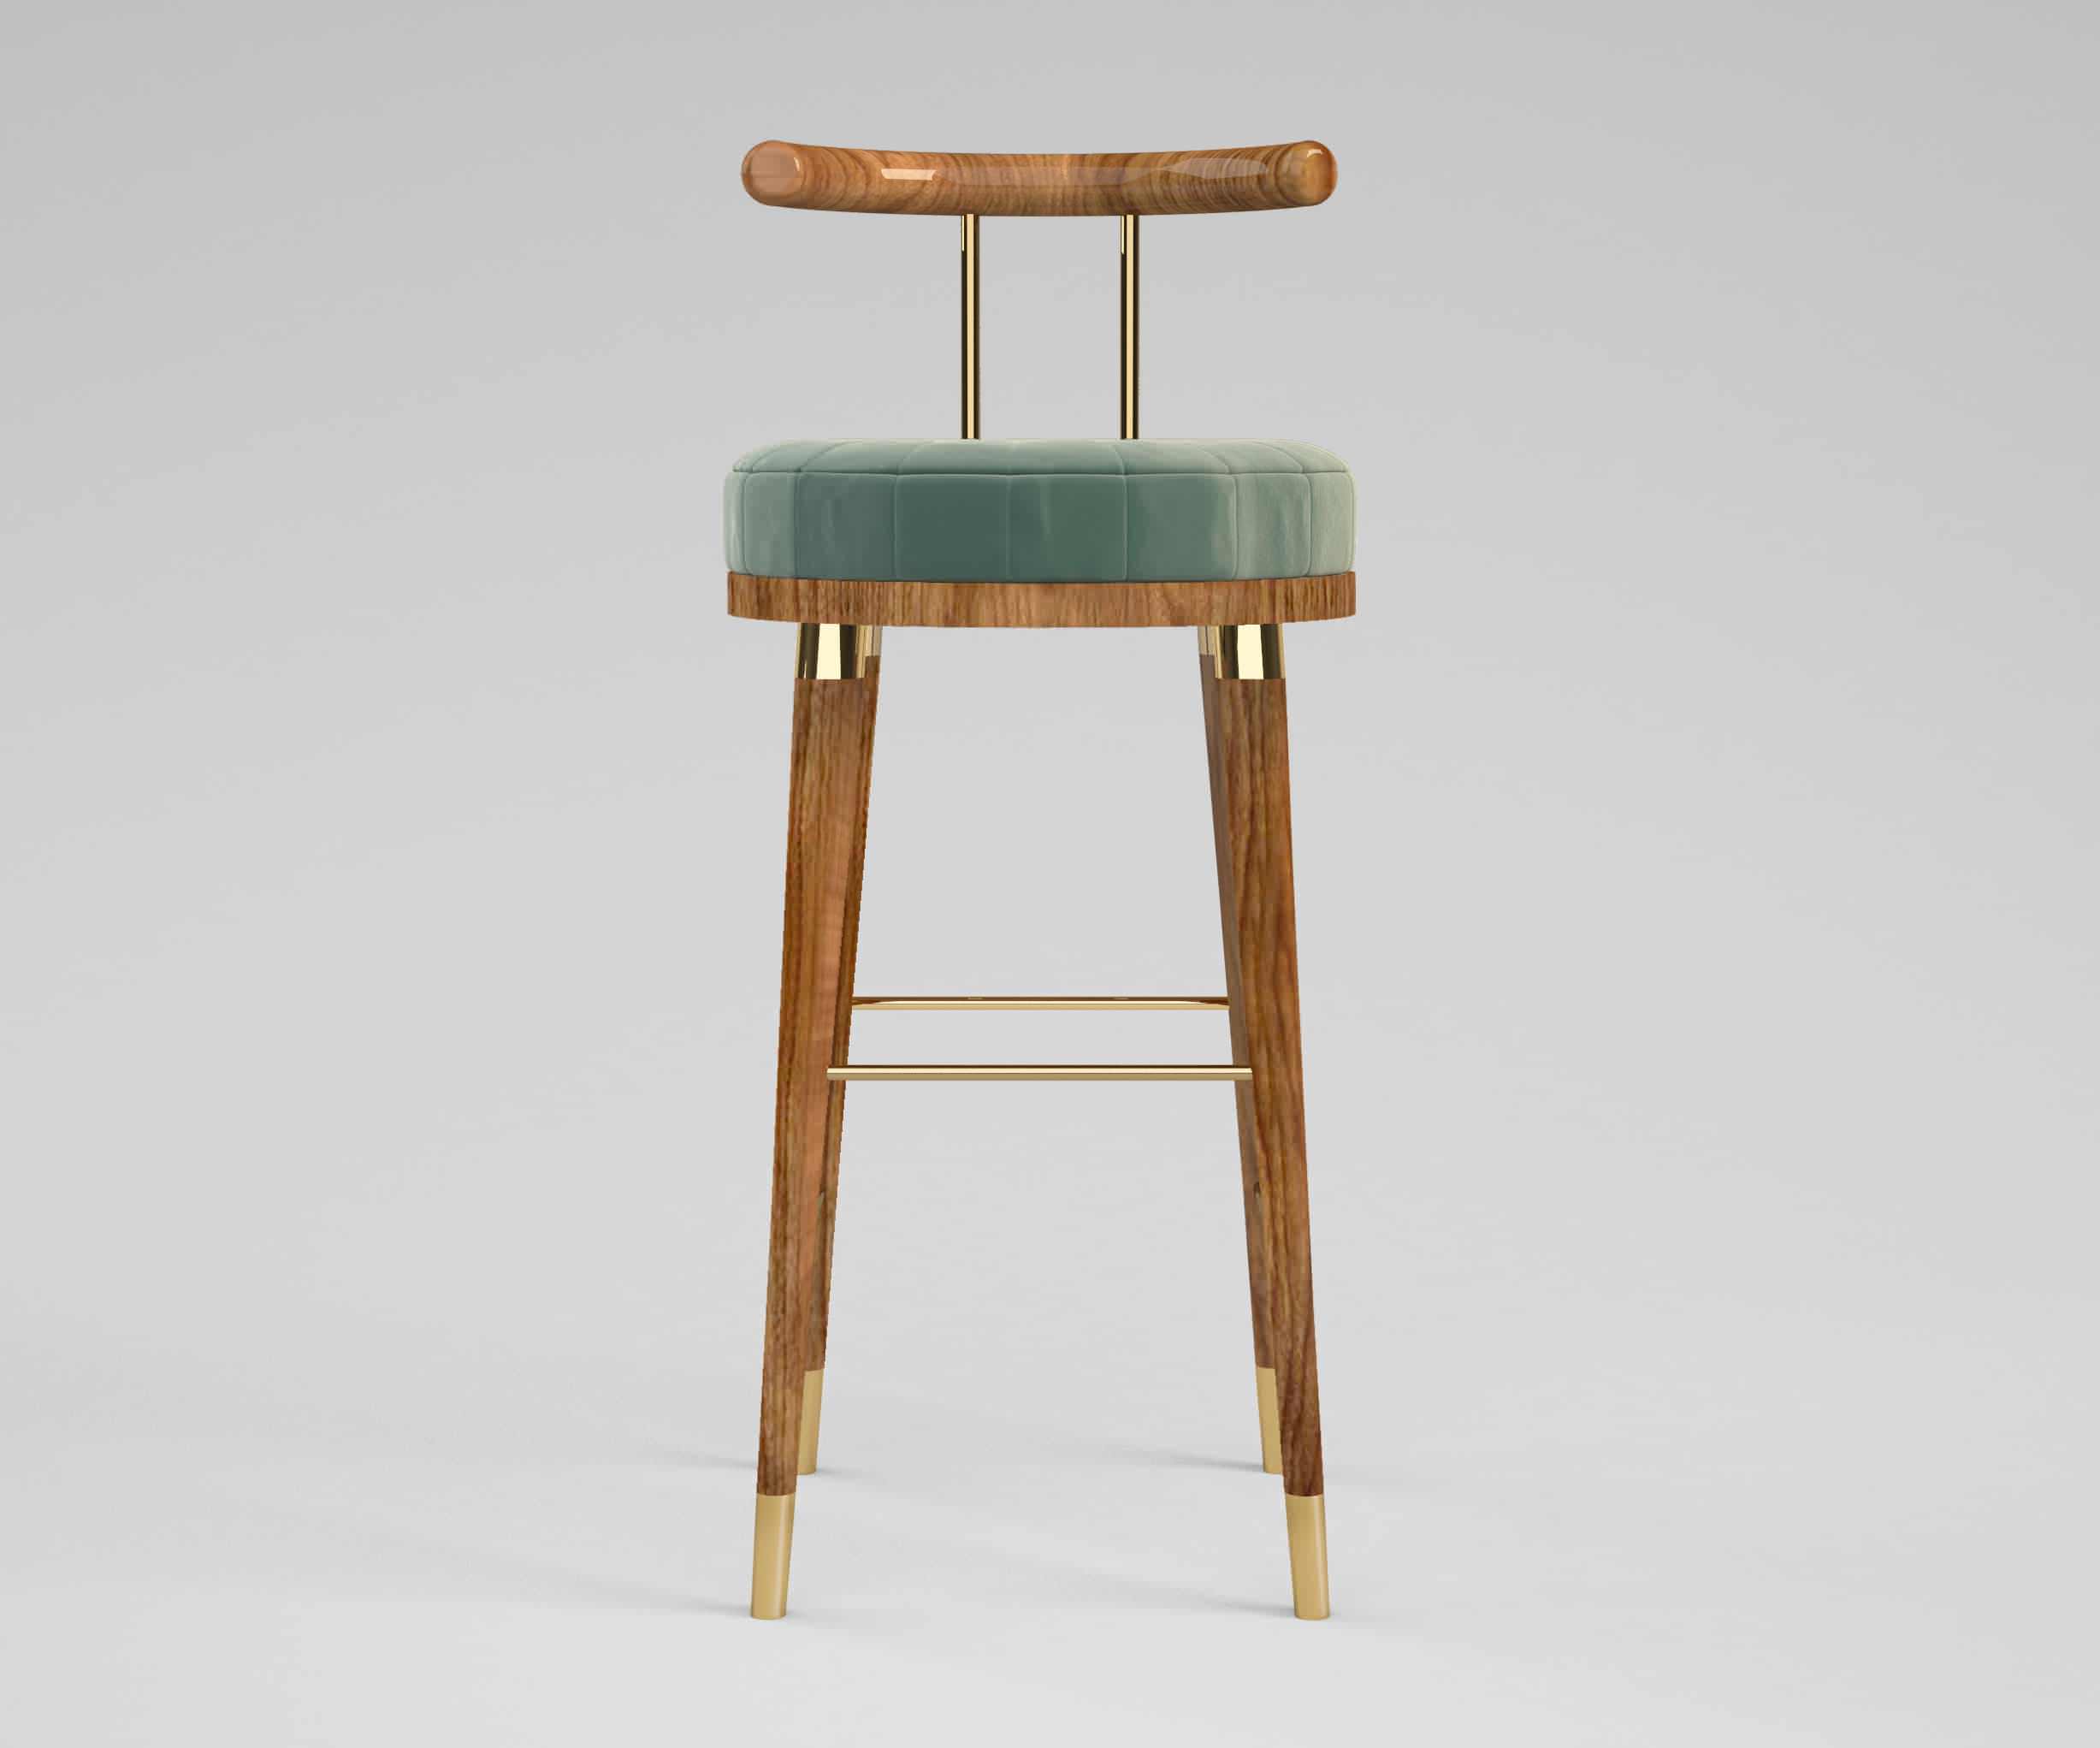 Crafted by Portuguese artisans in American walnut and upholstered in mint green cotton velvet.